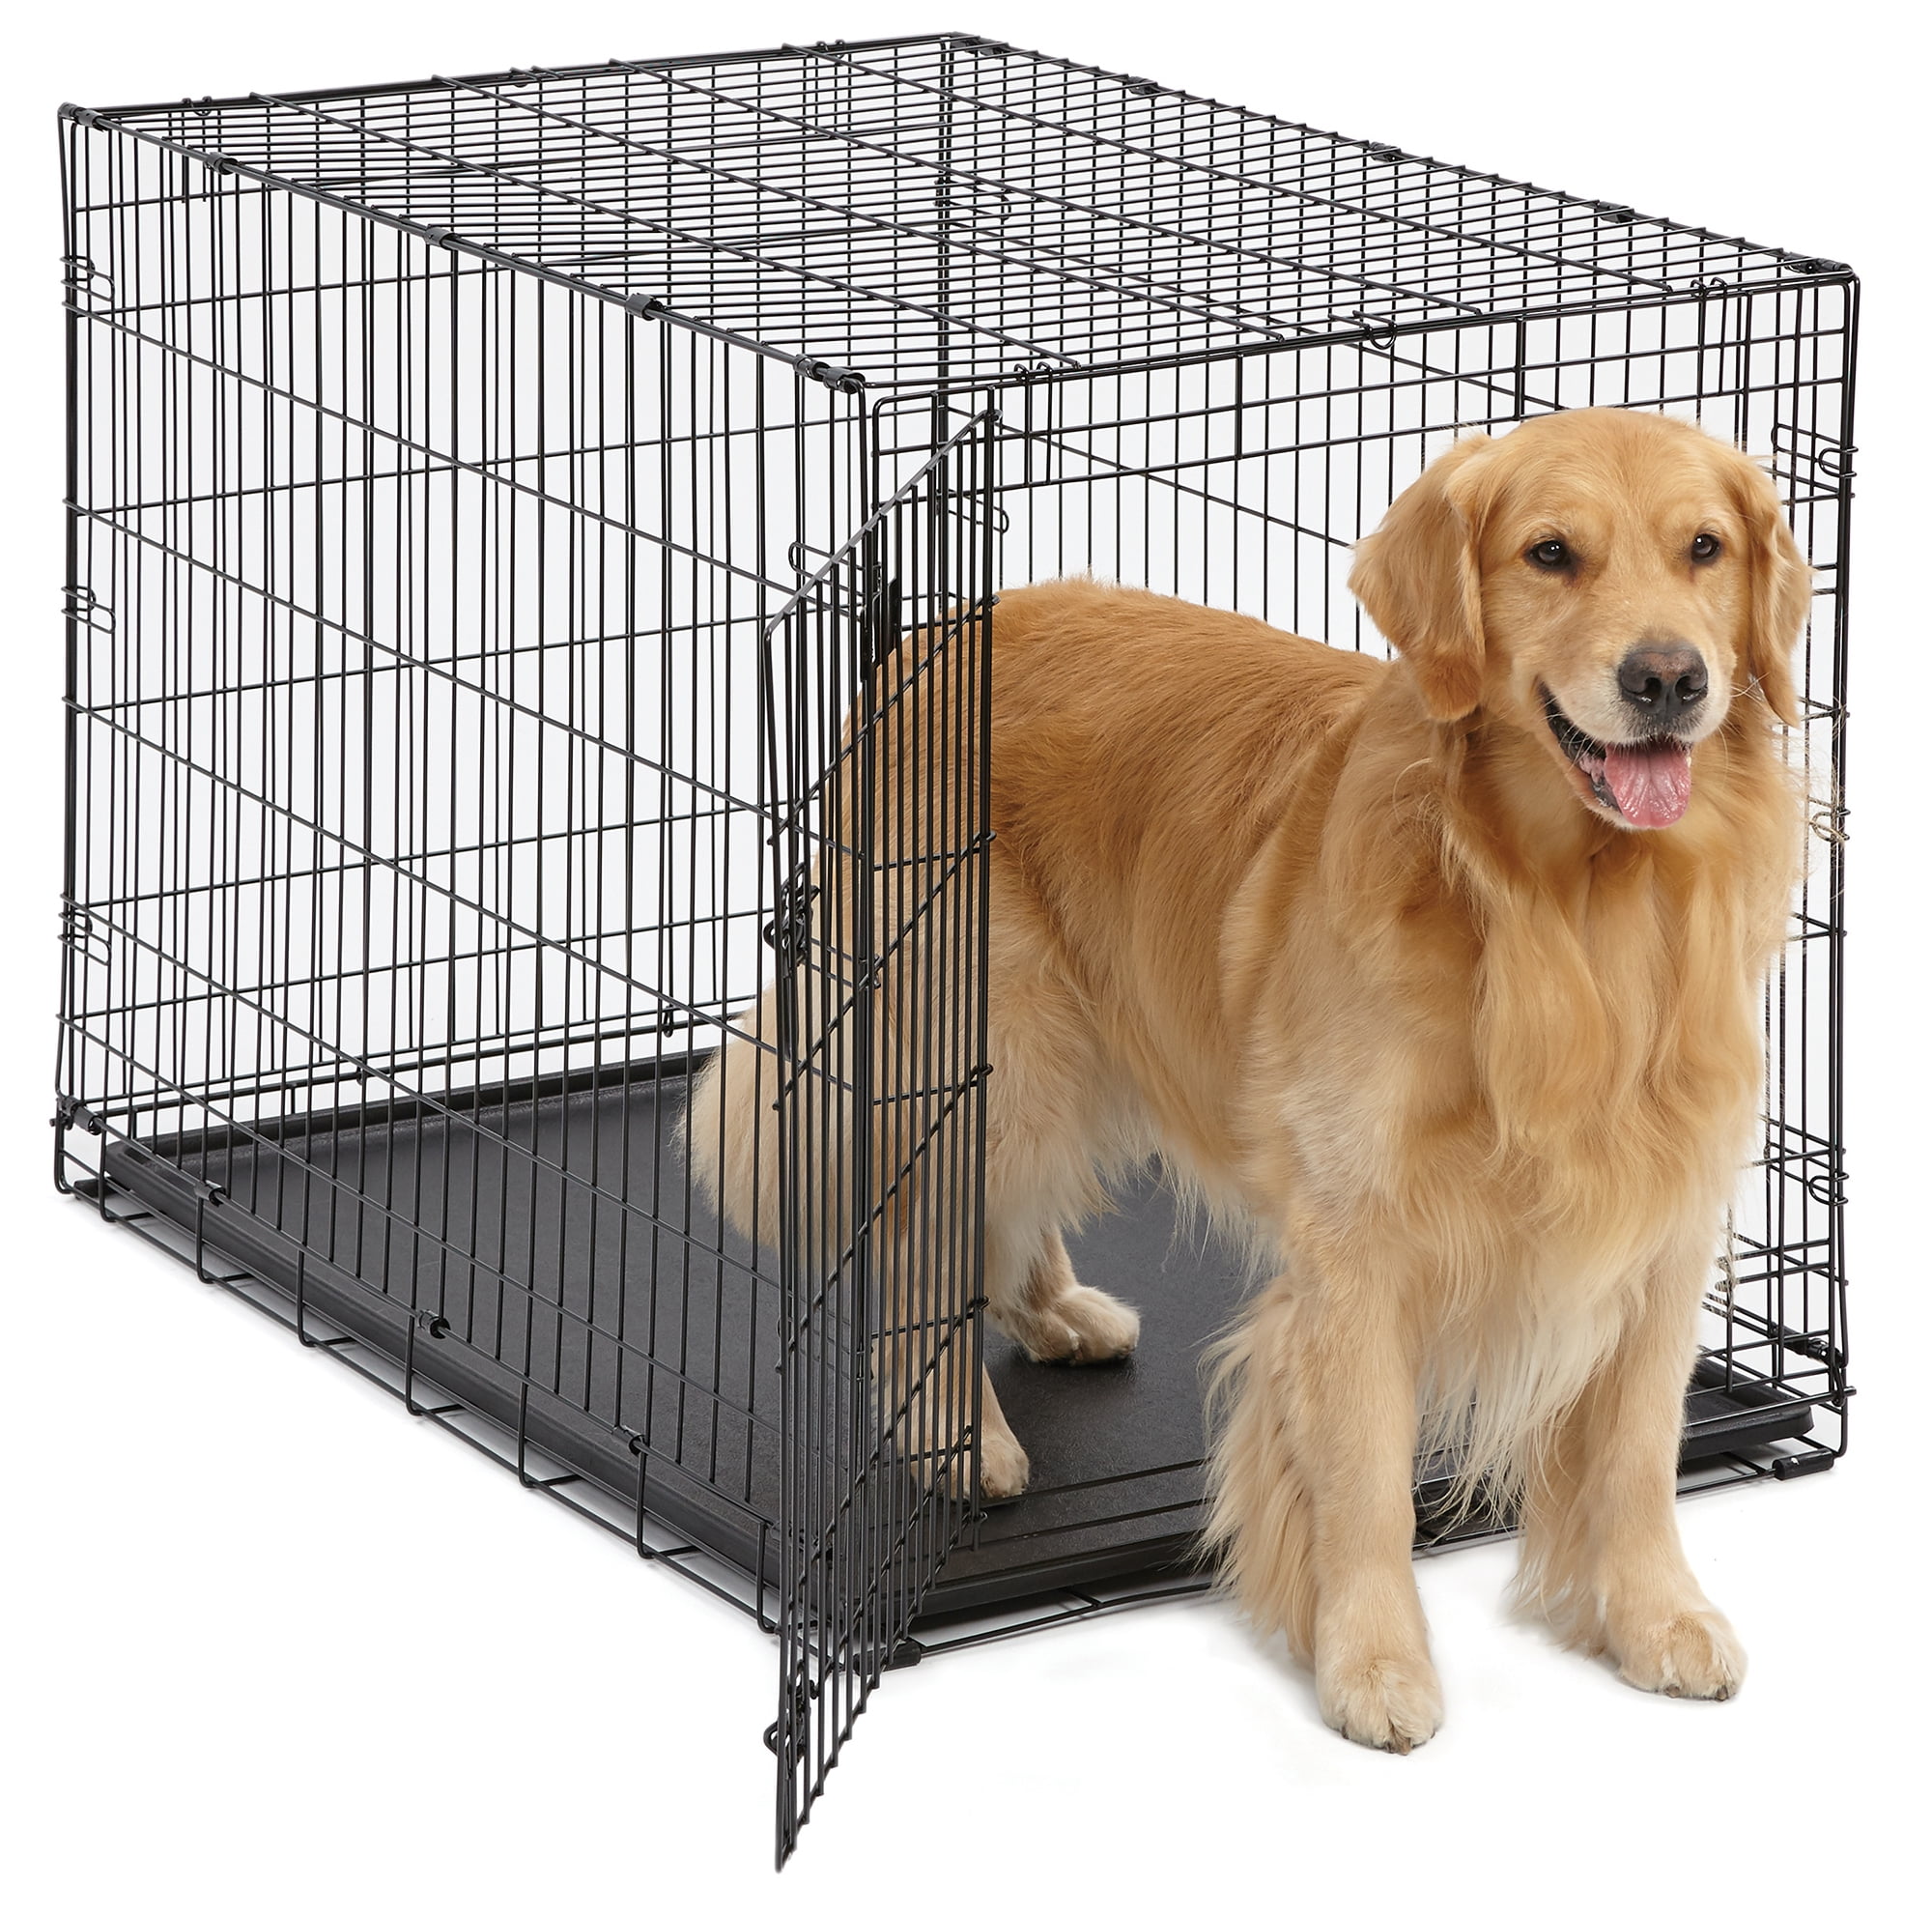 42 inch cage